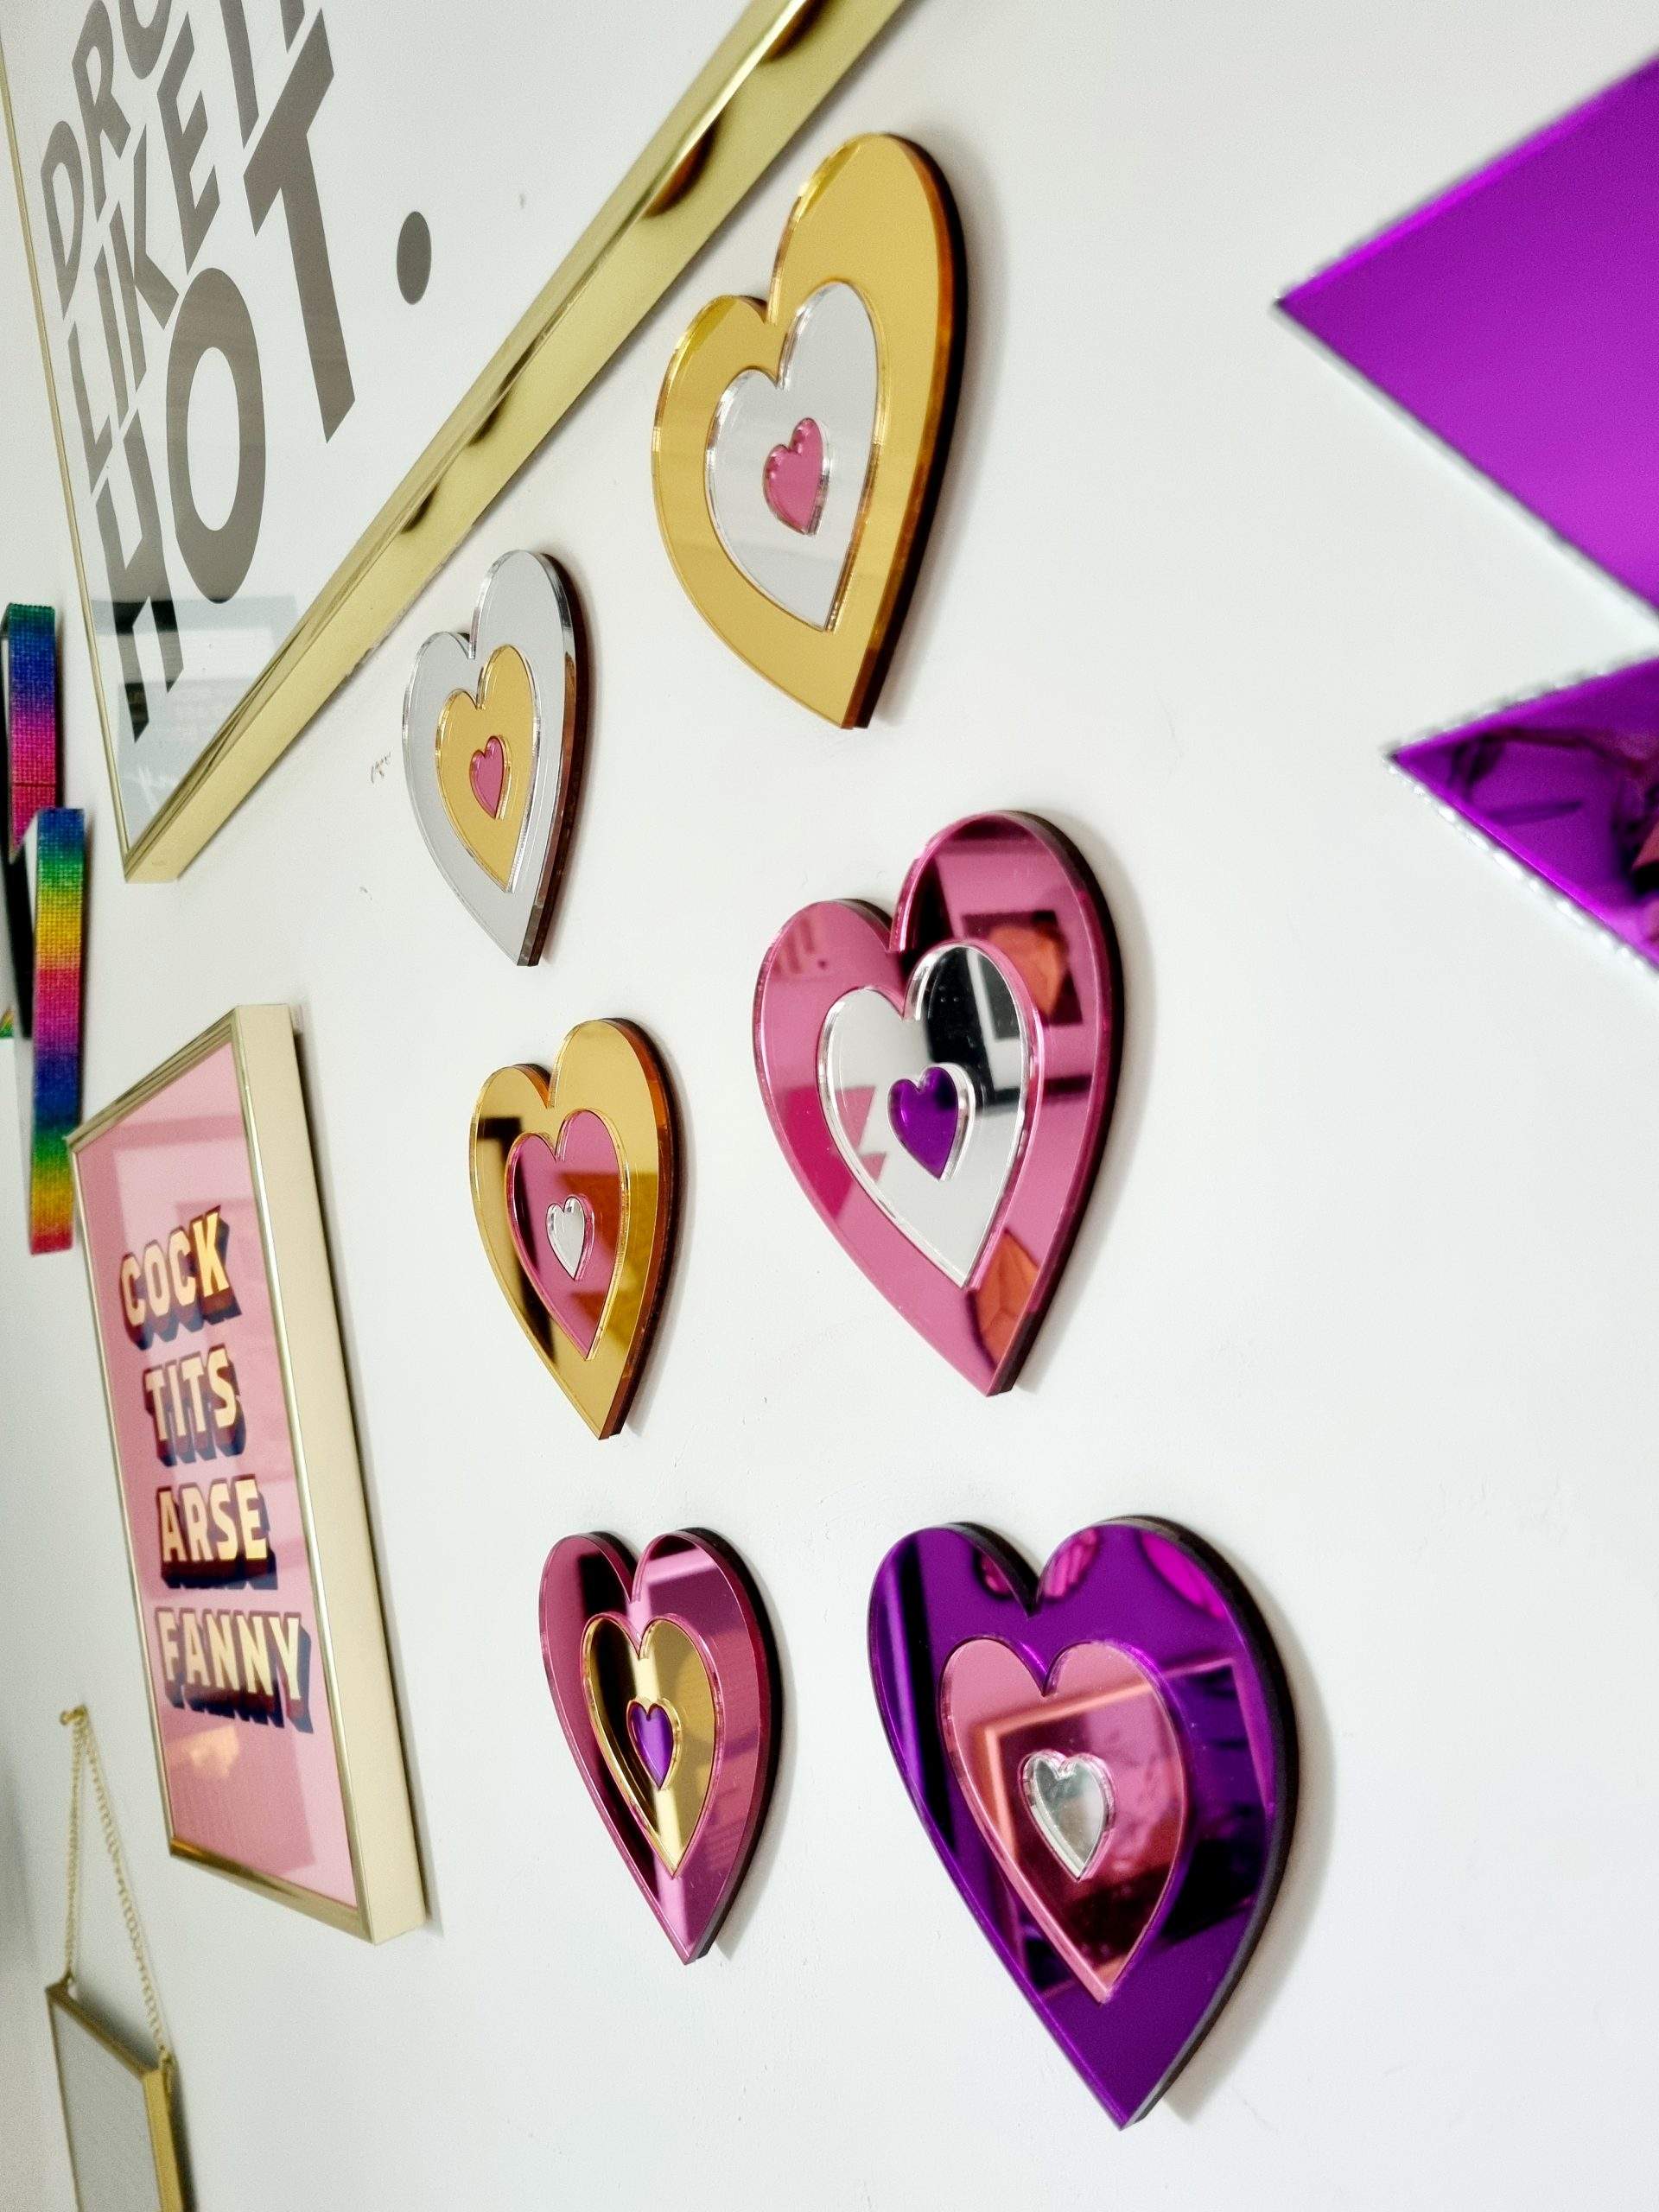 A set of 6 hearts made from gold, silver, pink and purple mirrored acrylic.